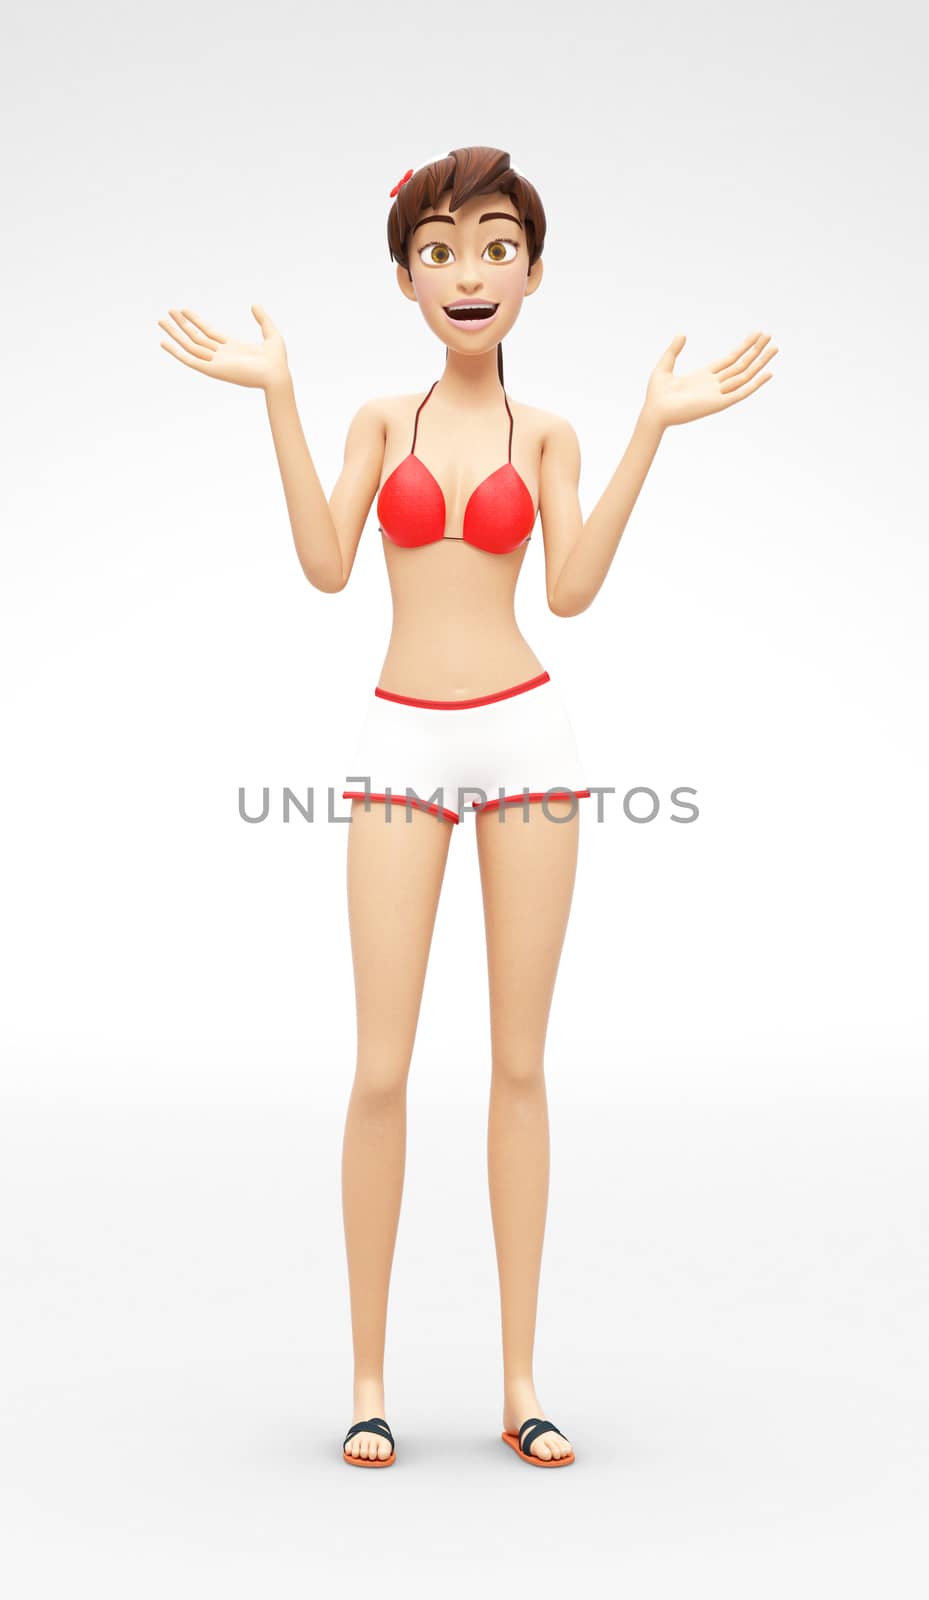 3D Rendered Animated Character in Casual Two-Piece Swimsuit Bikini, Isolated on White Spotlight Background
